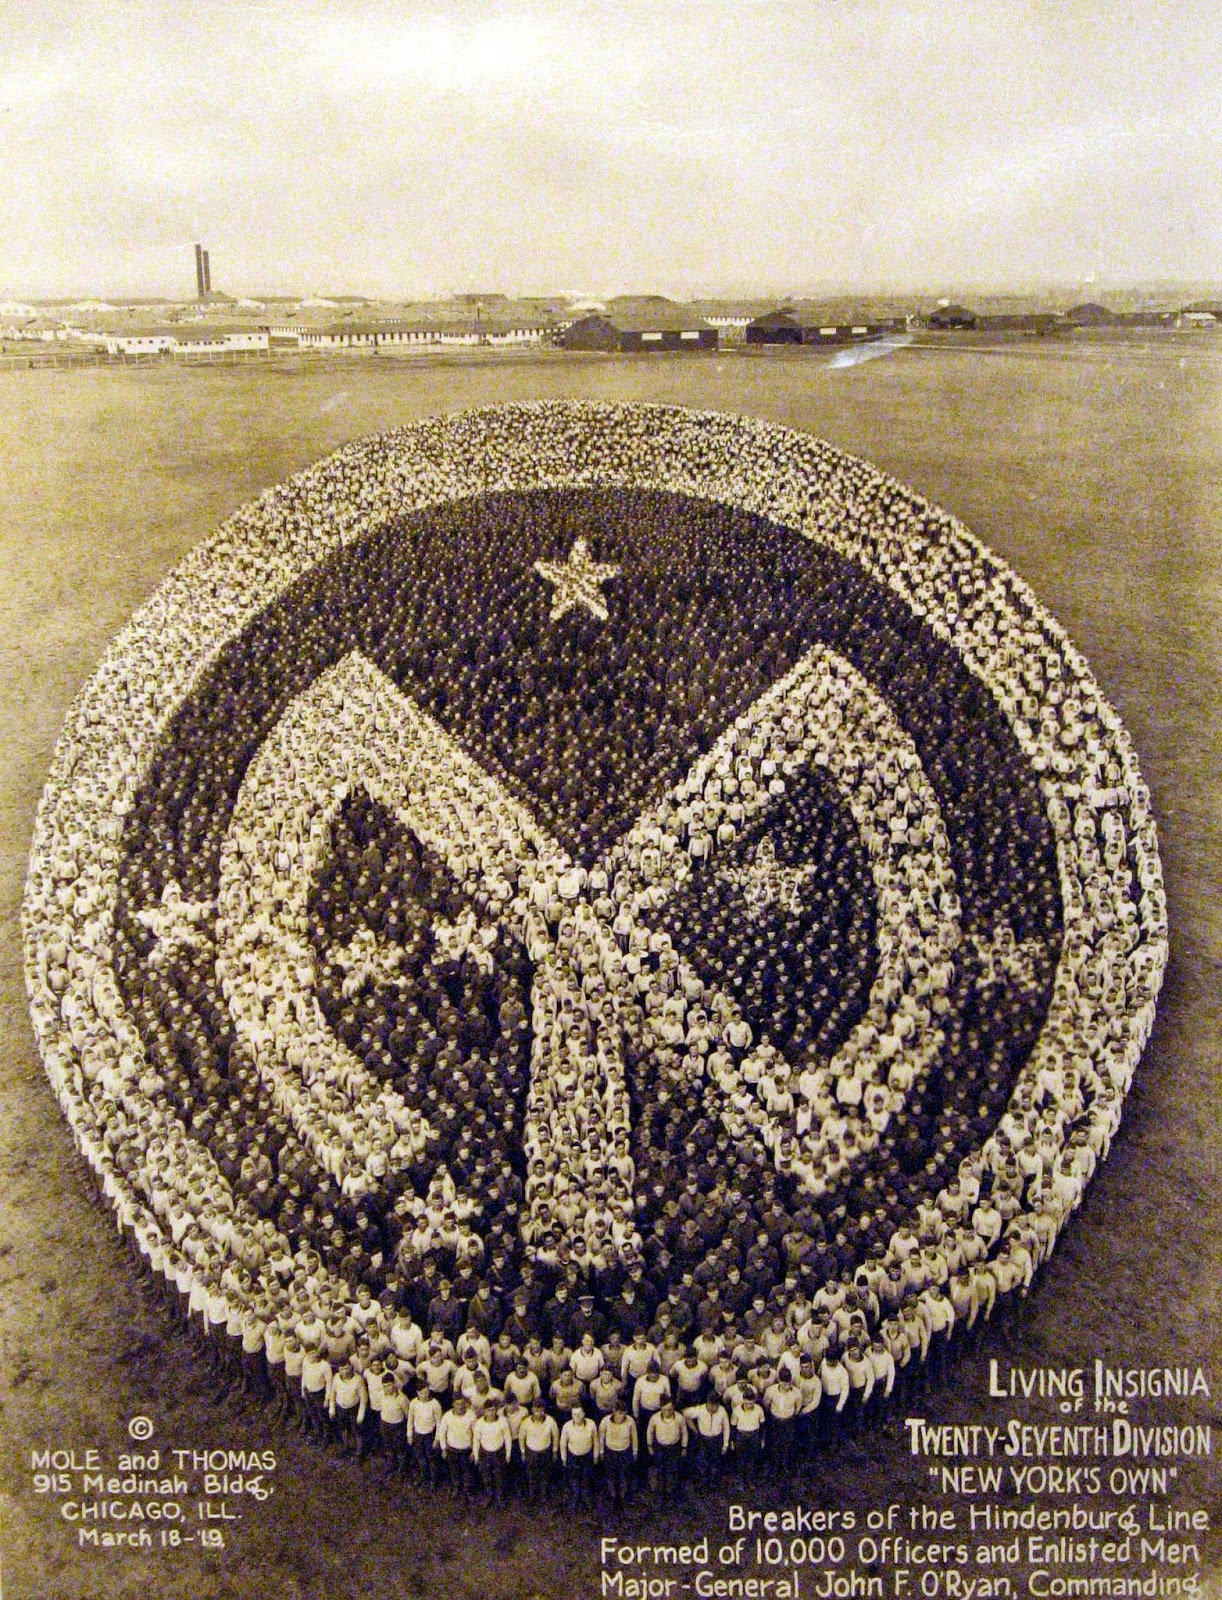 Living Insignia of the 27th Division, 1919, 10,000 officers and men